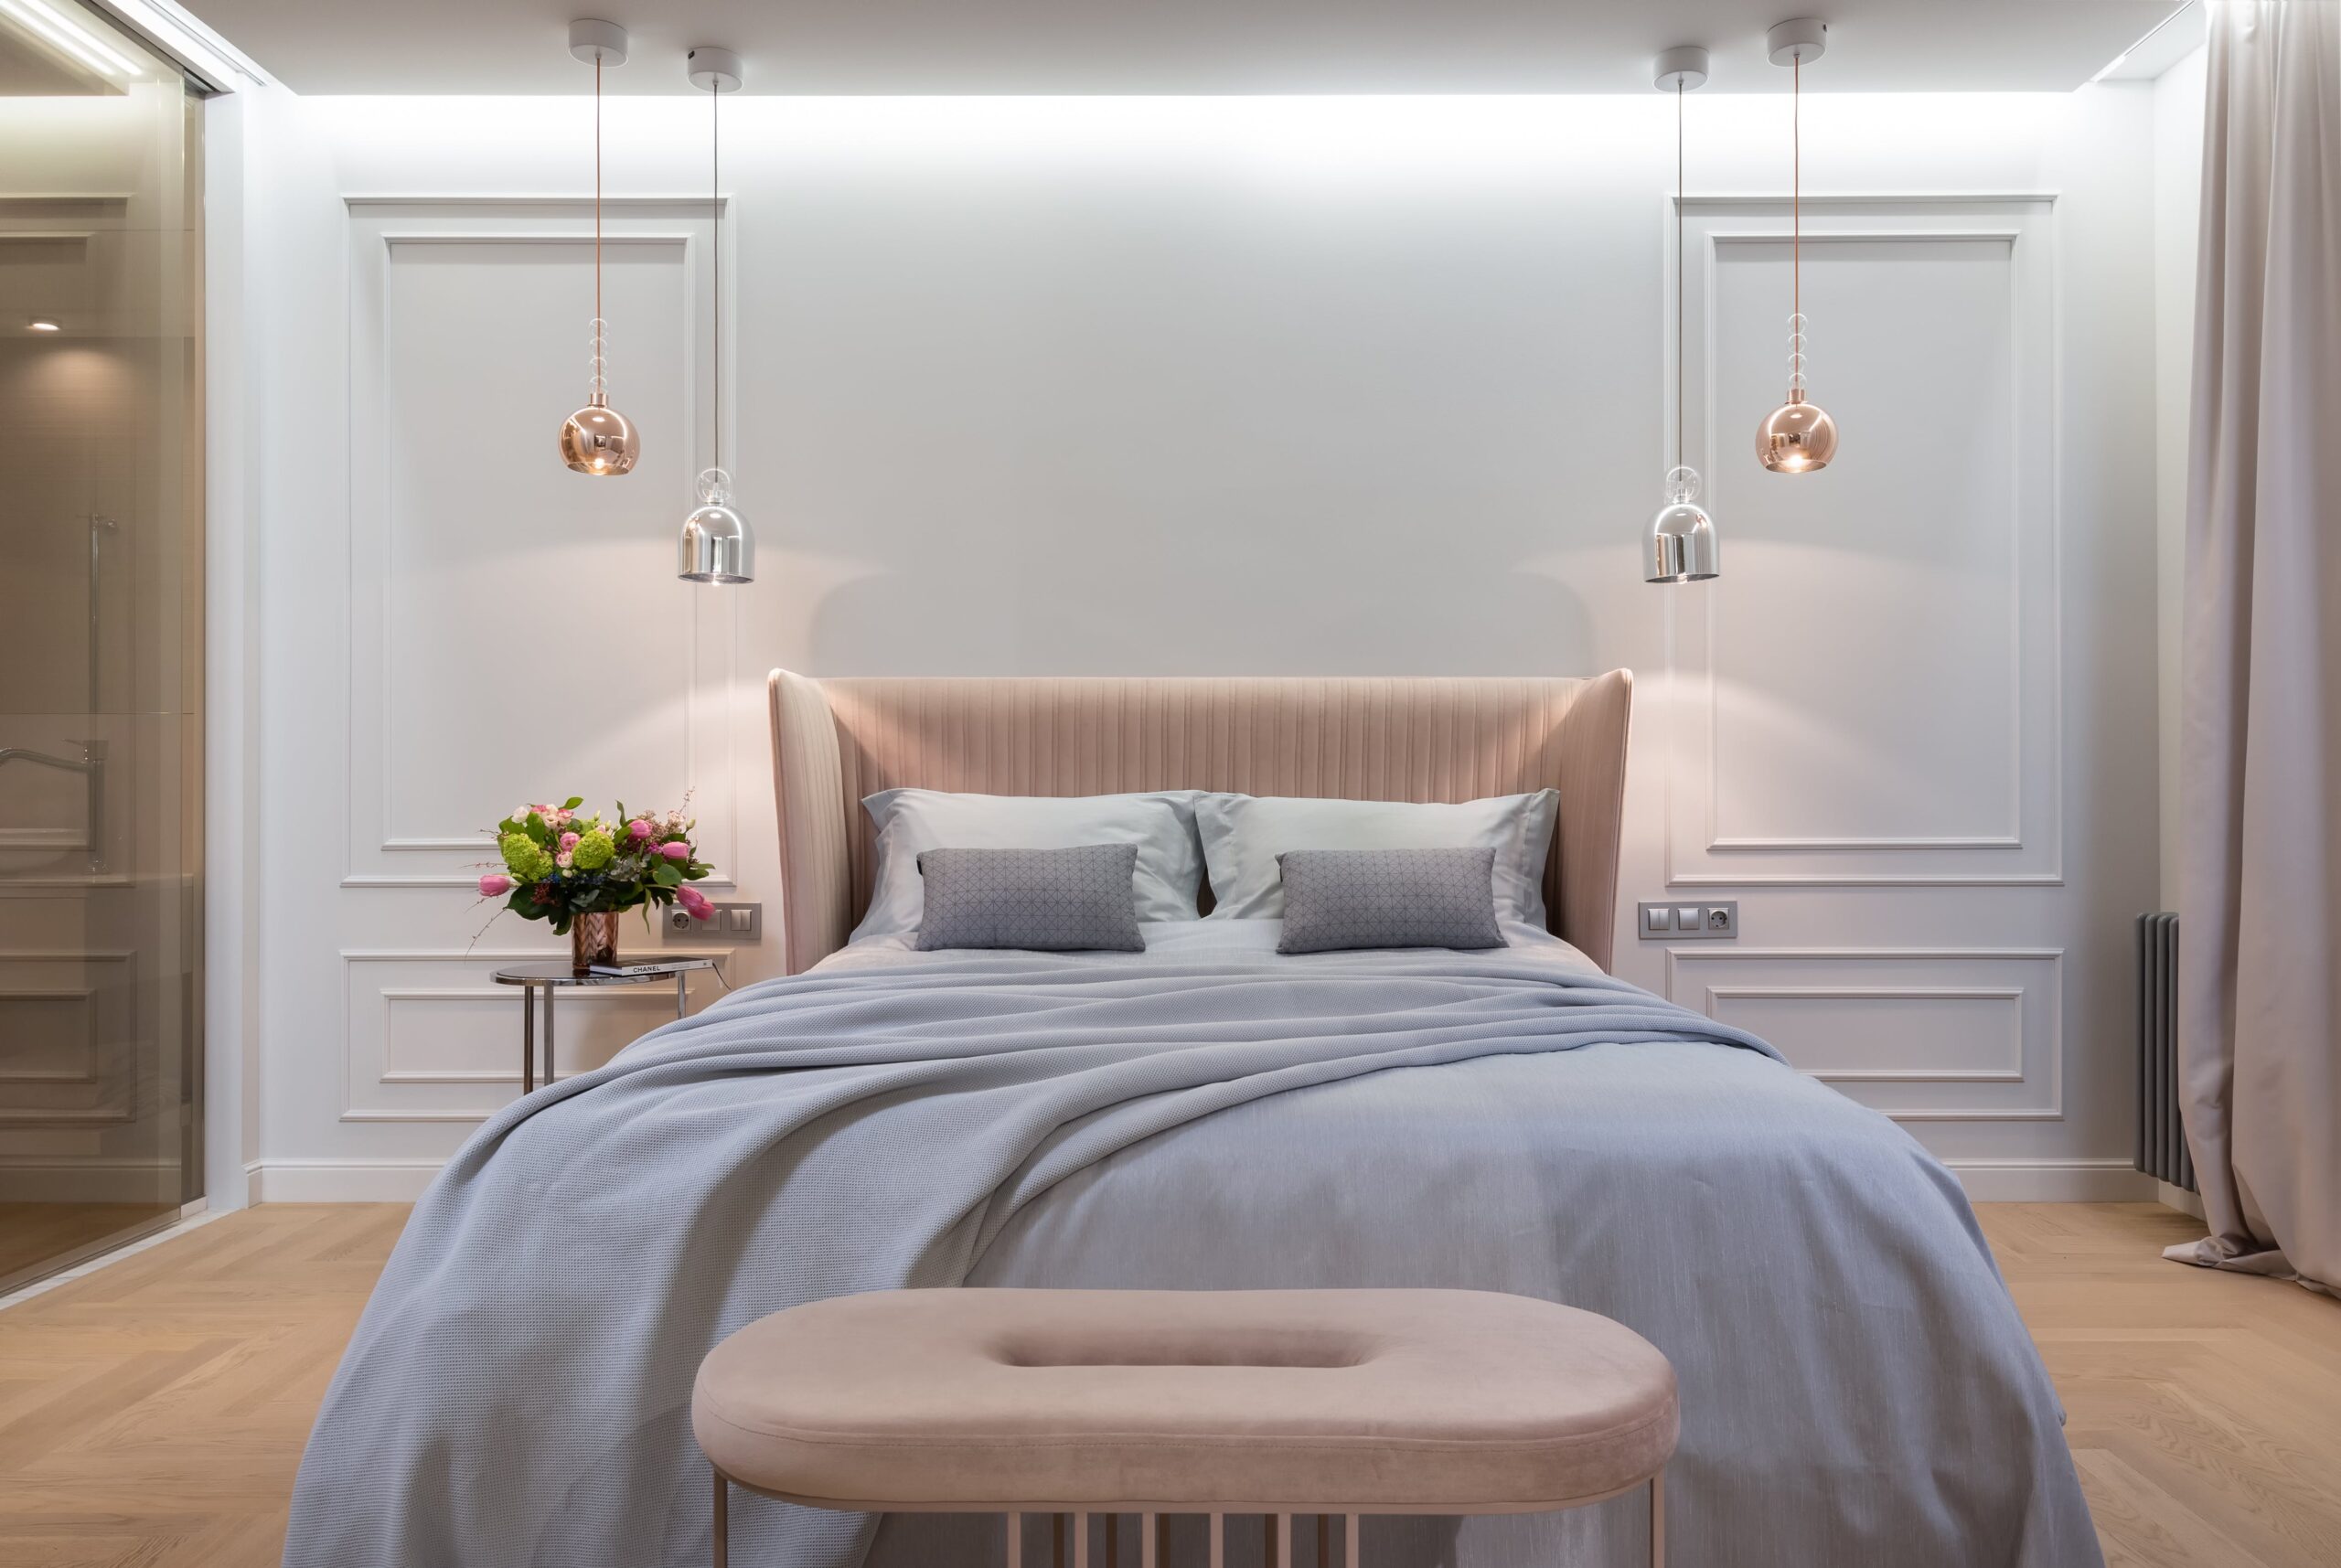 Use a plain white look for your bedroom color to have more flexibility in designing the space. Pictured: A bedroom with white walls and decor.